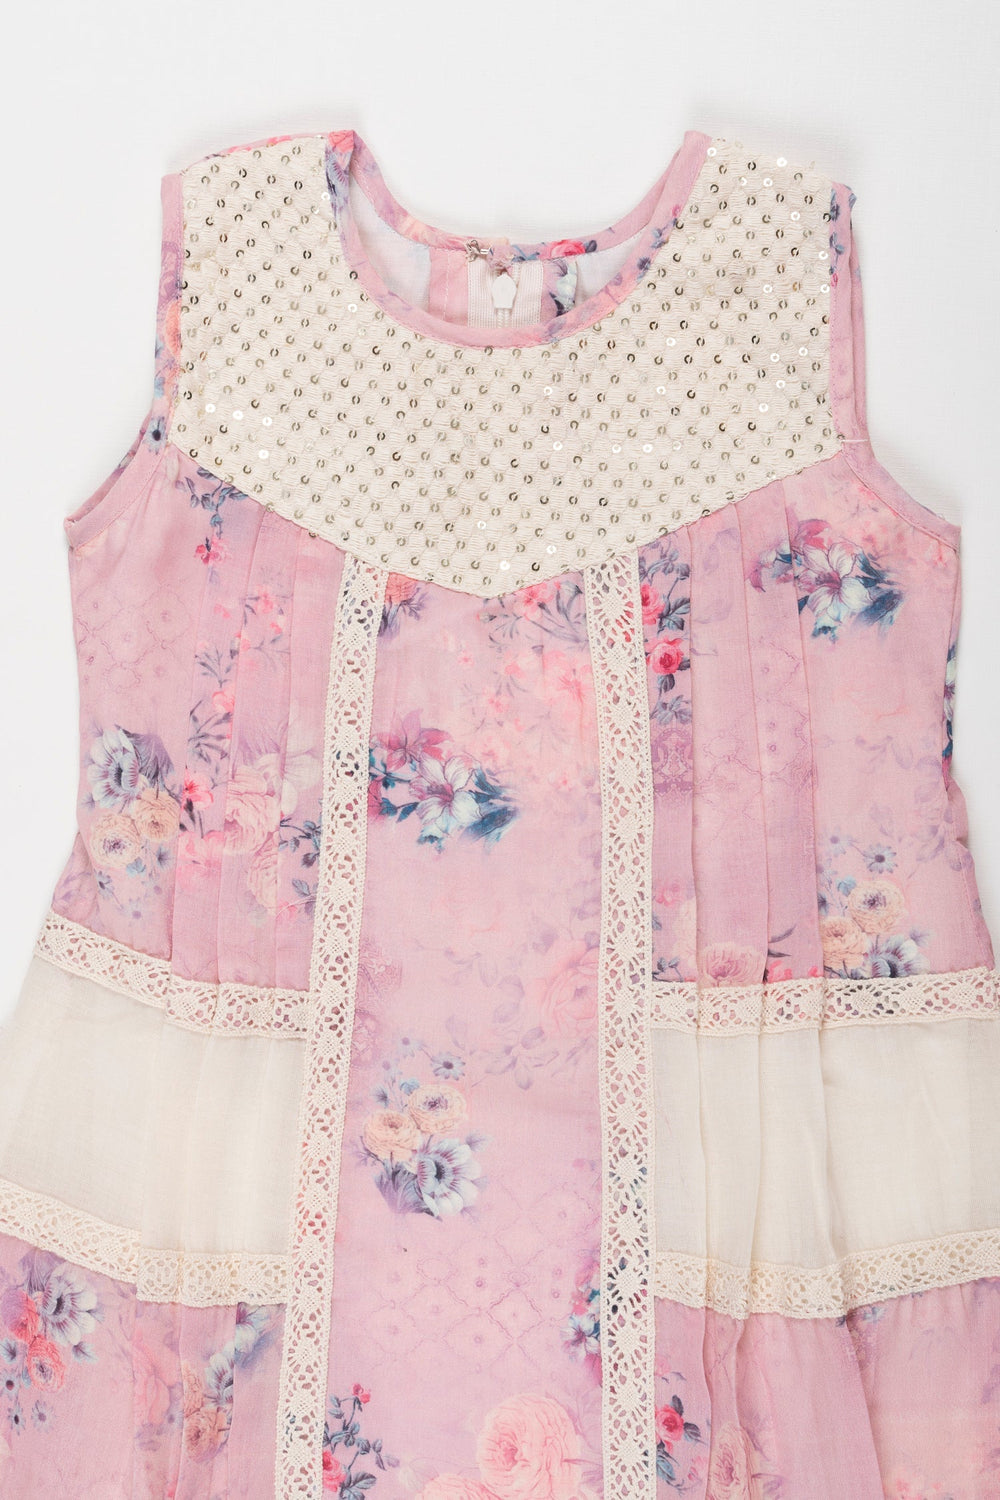 The Nesavu Girls Fancy Frock Enchanted Garden: Girls Airy Cotton Frock with Pastel Floral Design Nesavu Buy Pastel Floral Cotton Frock for Girls | Perfect for Summer Elegance | The Nesavu